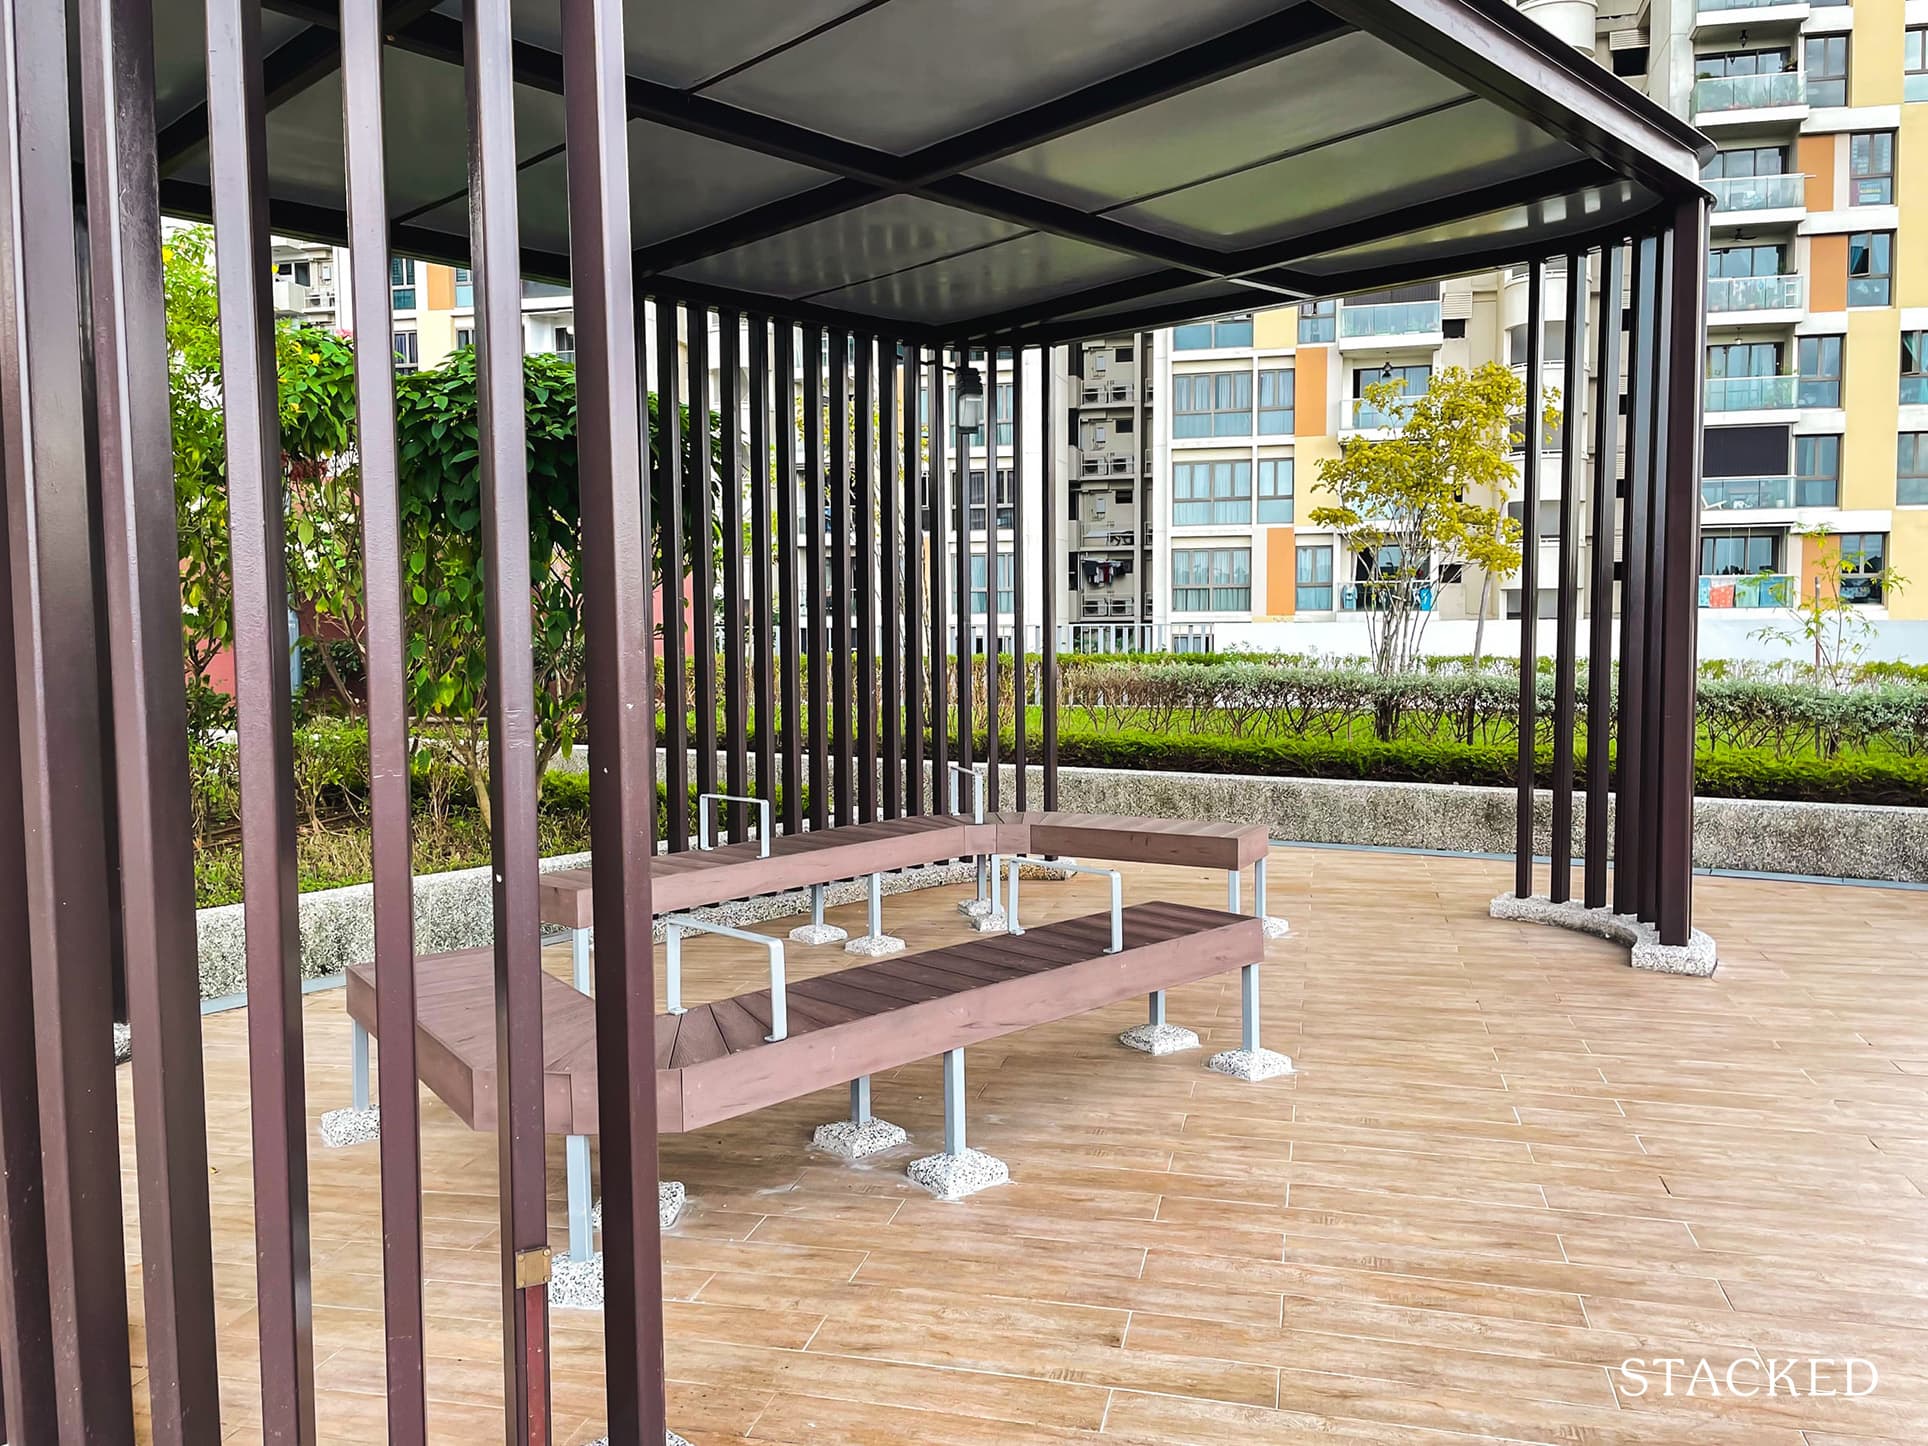 Hougang RiverCourt sheltered seating